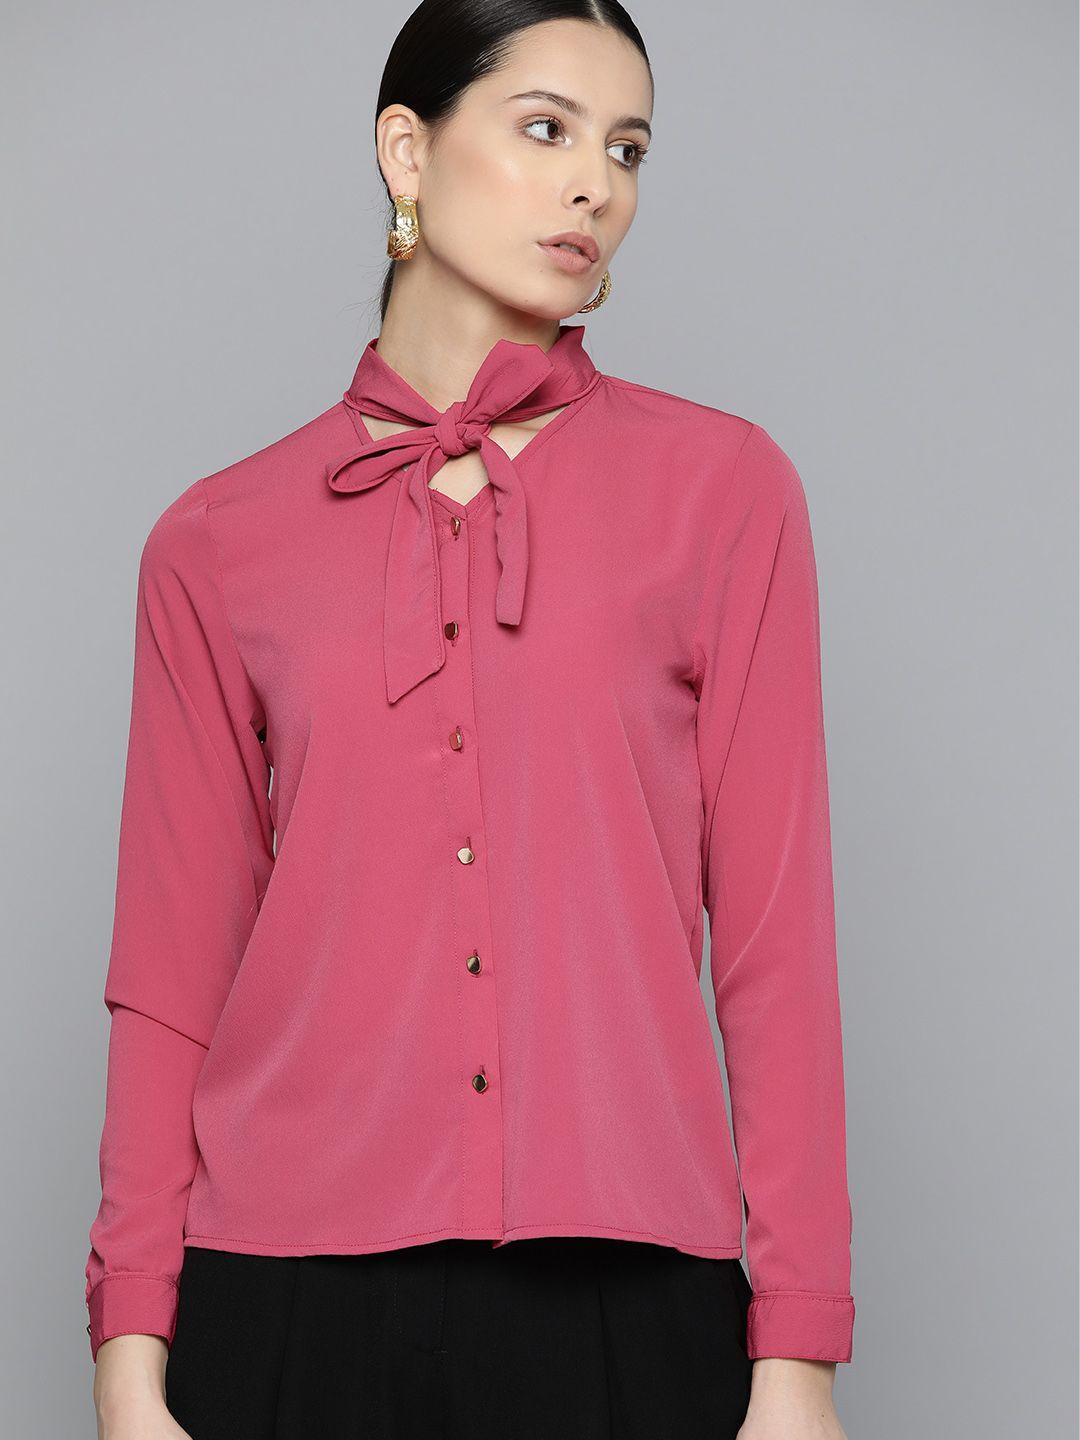 chemistry tie-up neck shirt style top